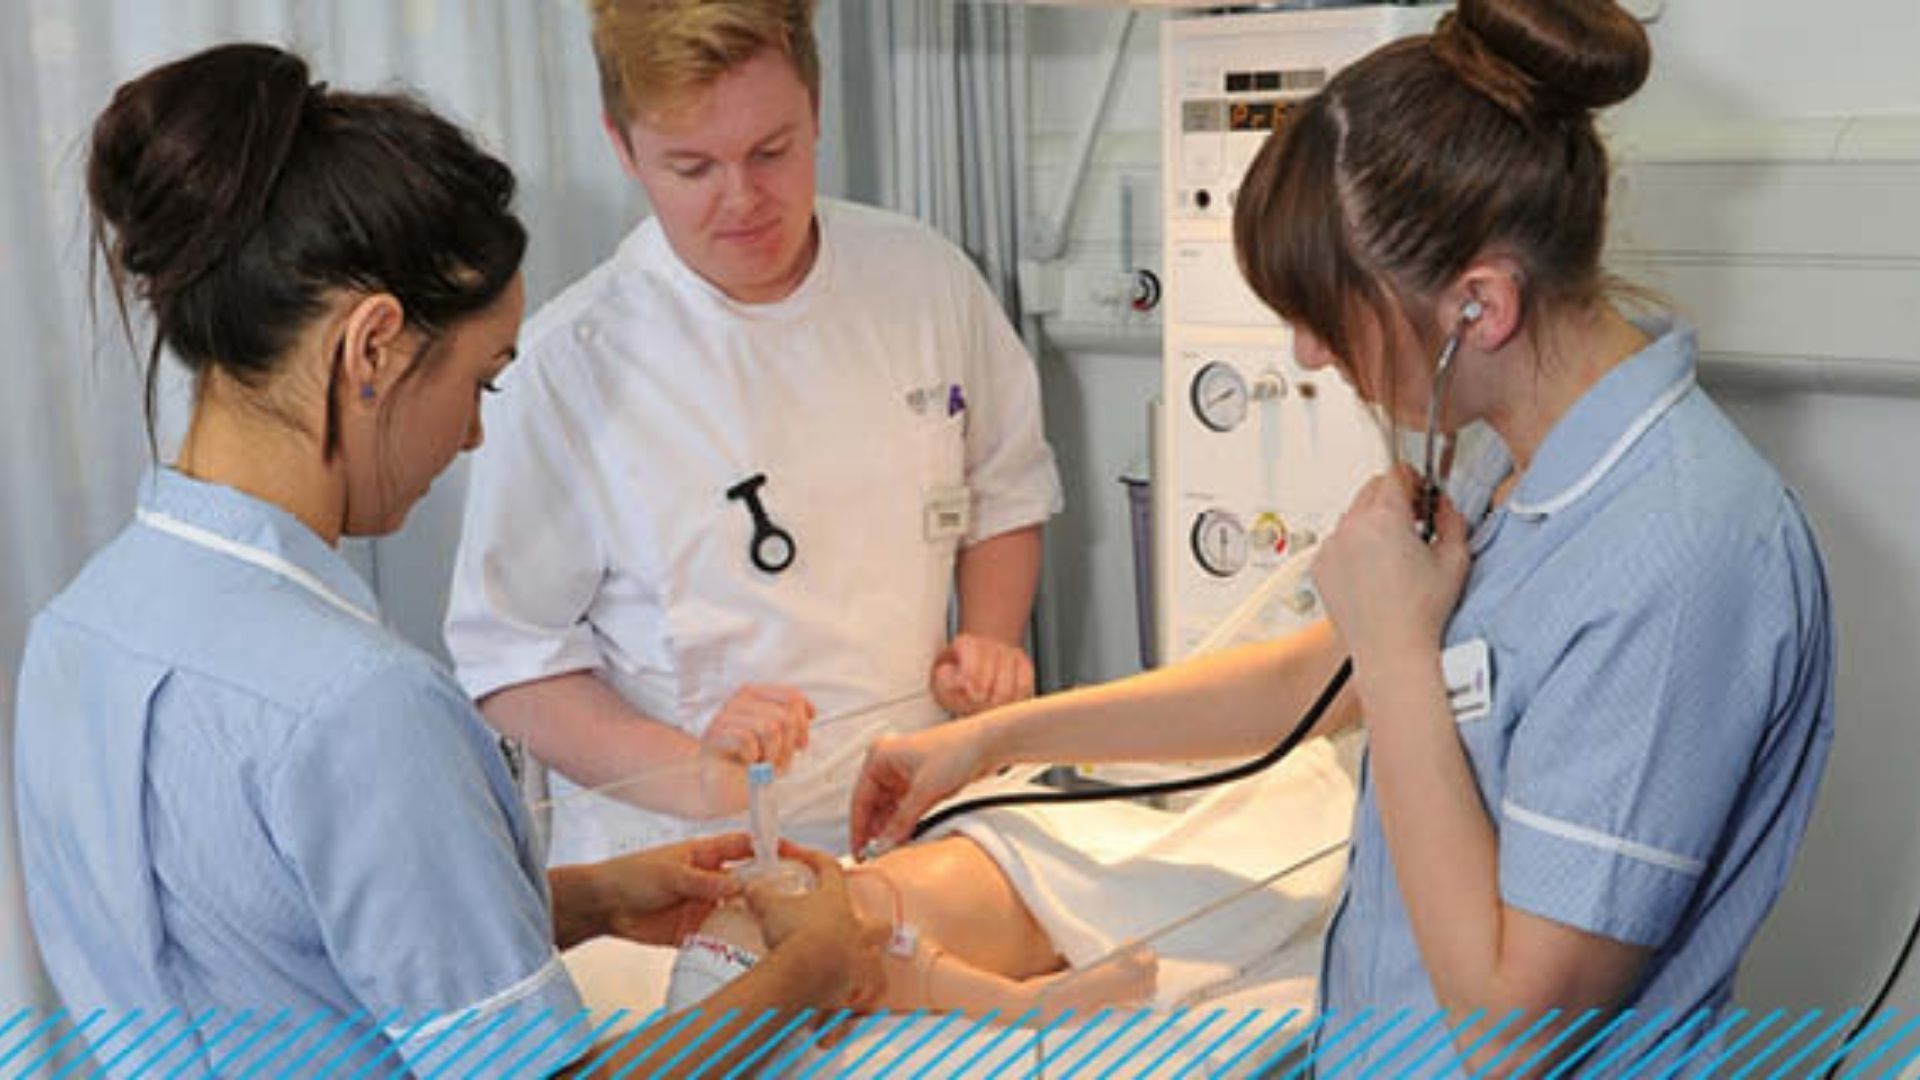 Three Child Nursing students stood around a young child (dummy) on a hospital bed